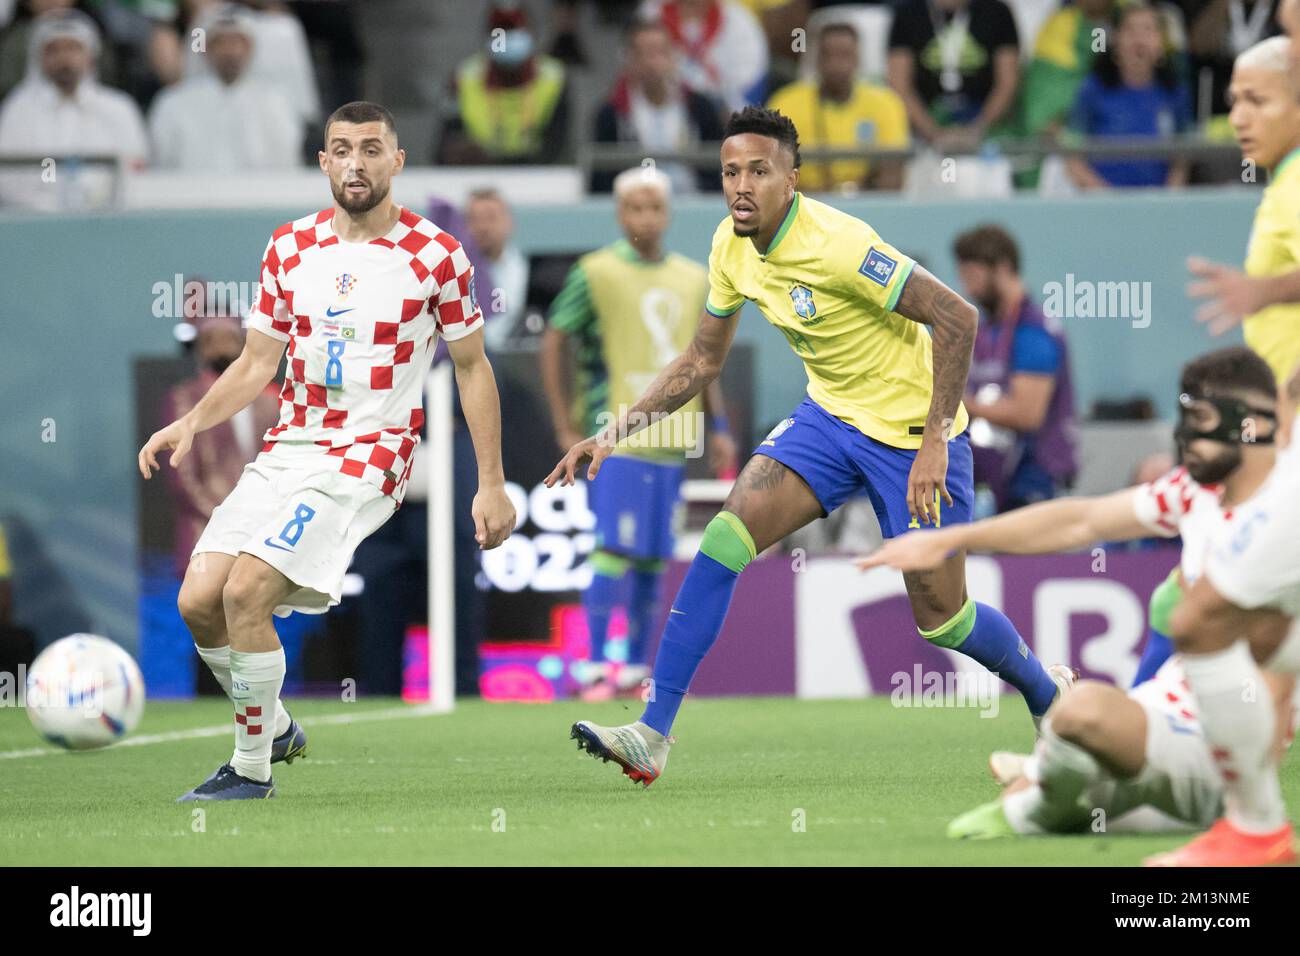 Doha, Qatar. 10th Dec, 2022. Eder Militao of Brazil and Mateo Kovacic of Croatia in action during the FIFA World Cup Qatar 2022 quarter final match between Croatia and Brazil at Education City Stadium on December 09, 2022 in Doha, Qatar. Photo by David Niviere/ABACAPRESS.COM Credit: Abaca Press/Alamy Live News Stock Photo